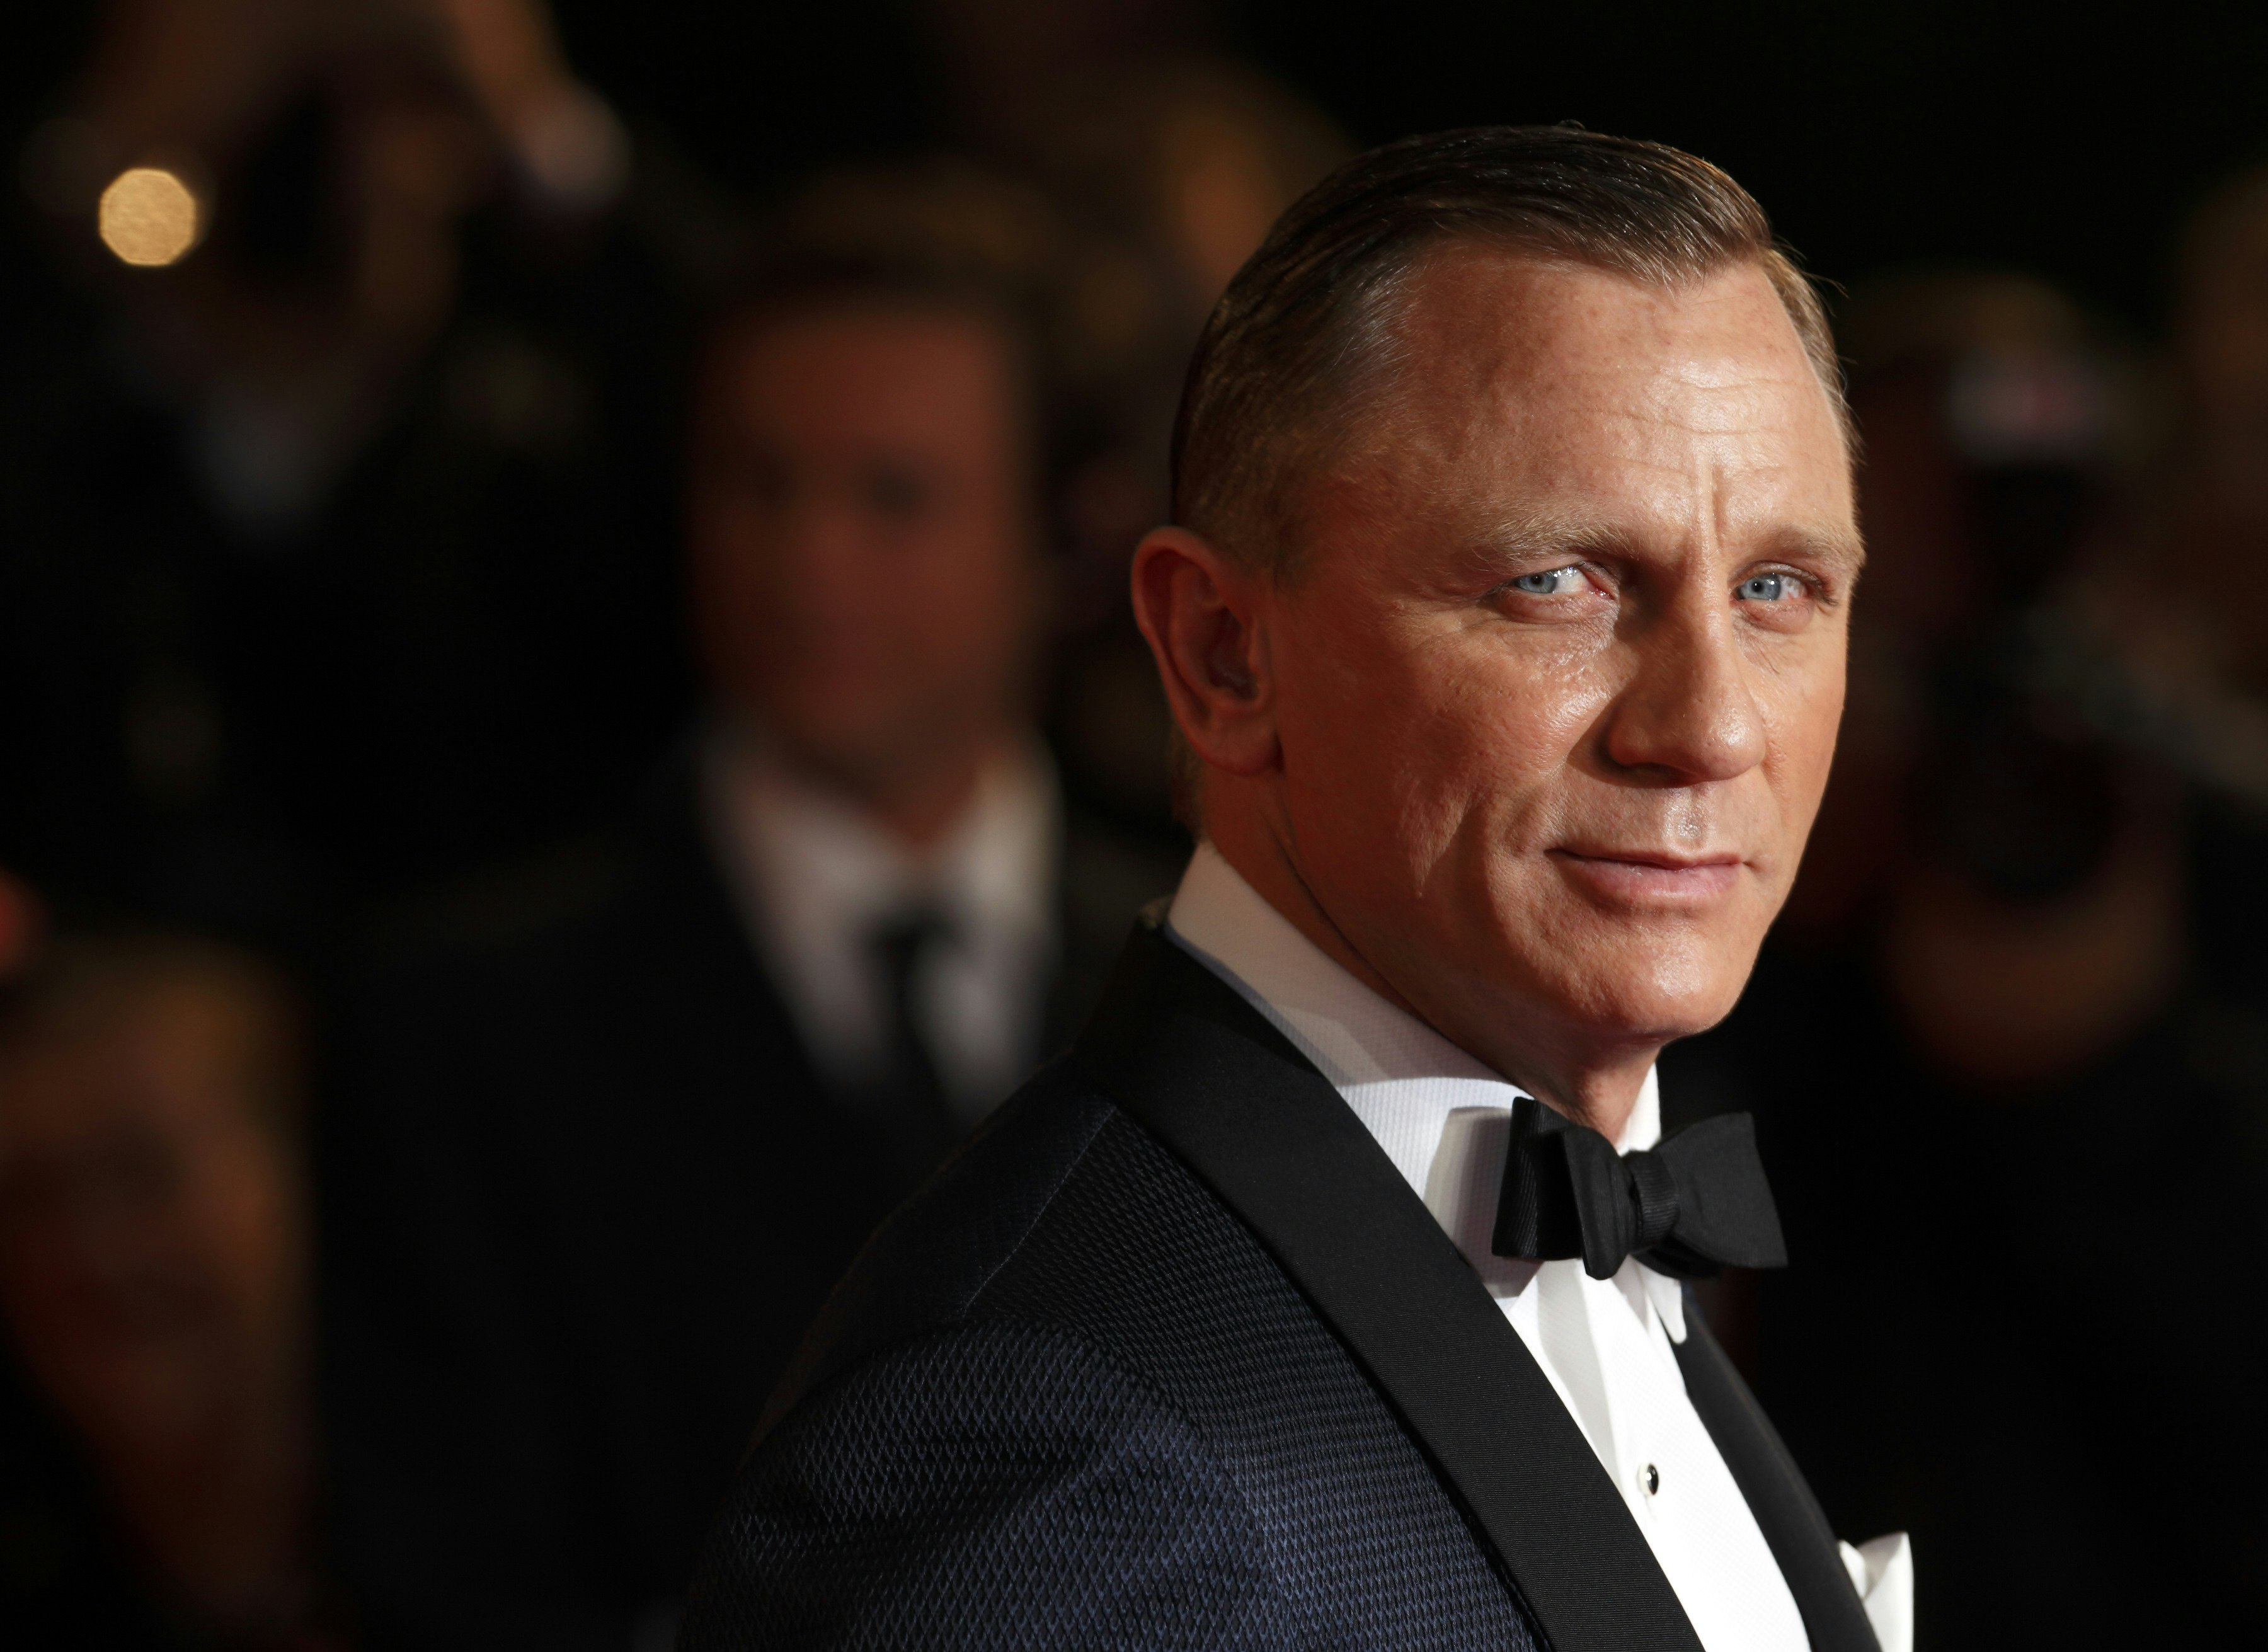 James Bond actor Daniel Craig is wearing a tuxedo and looking towards the camera; the background is dark and in soft focus.